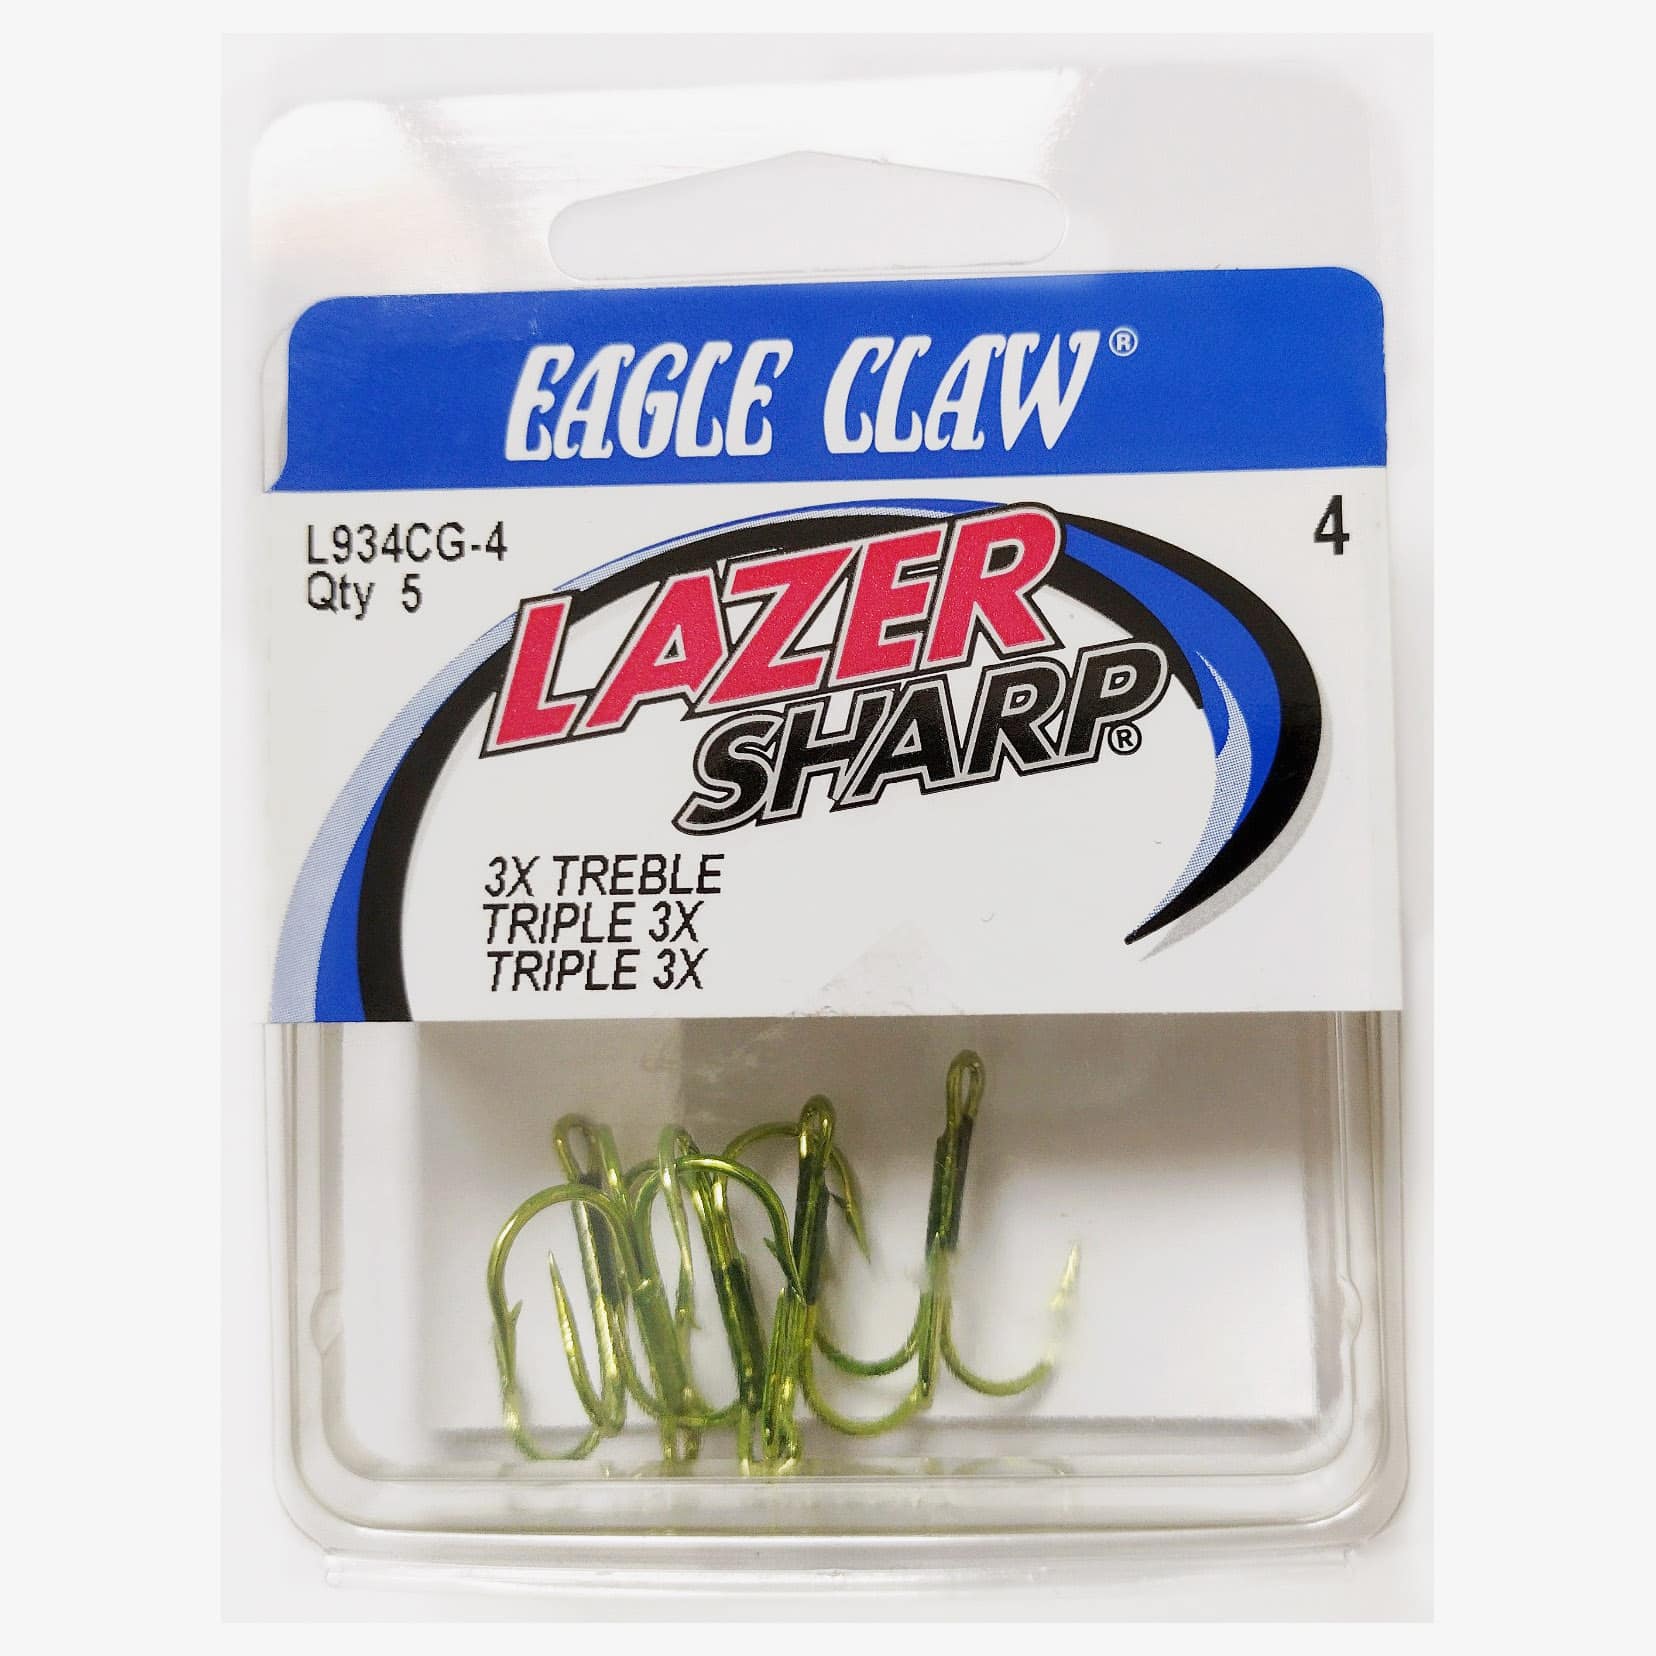 CLOSEOUT* EAGLE CLAW GREEN LAZER SHARP TREBLE HOOKS - SIZE 4 - Northwoods  Wholesale Outlet